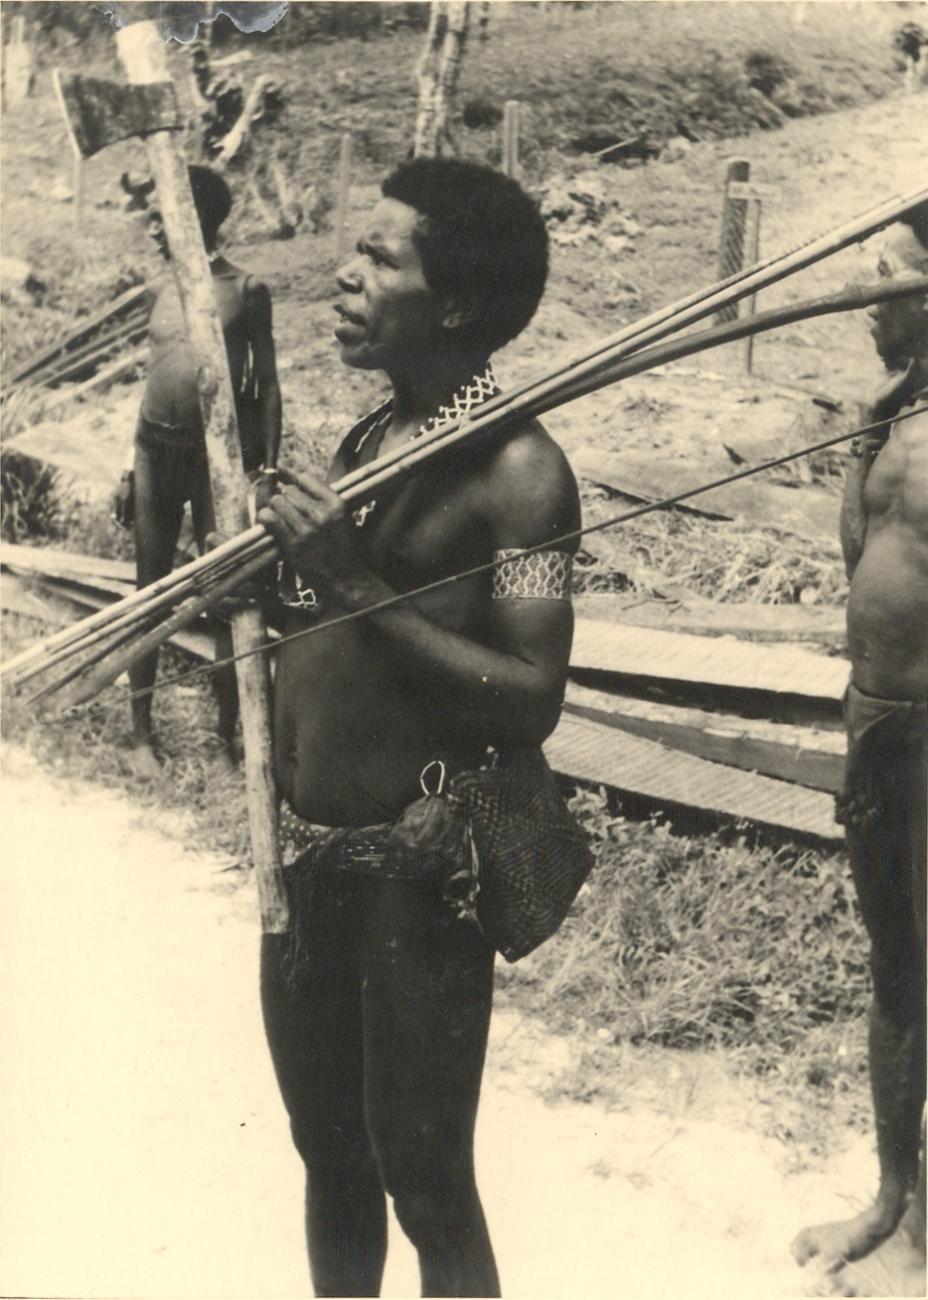 BD/1/1 - 
Man from the Arfak Mountains with axe, bow and arrows
